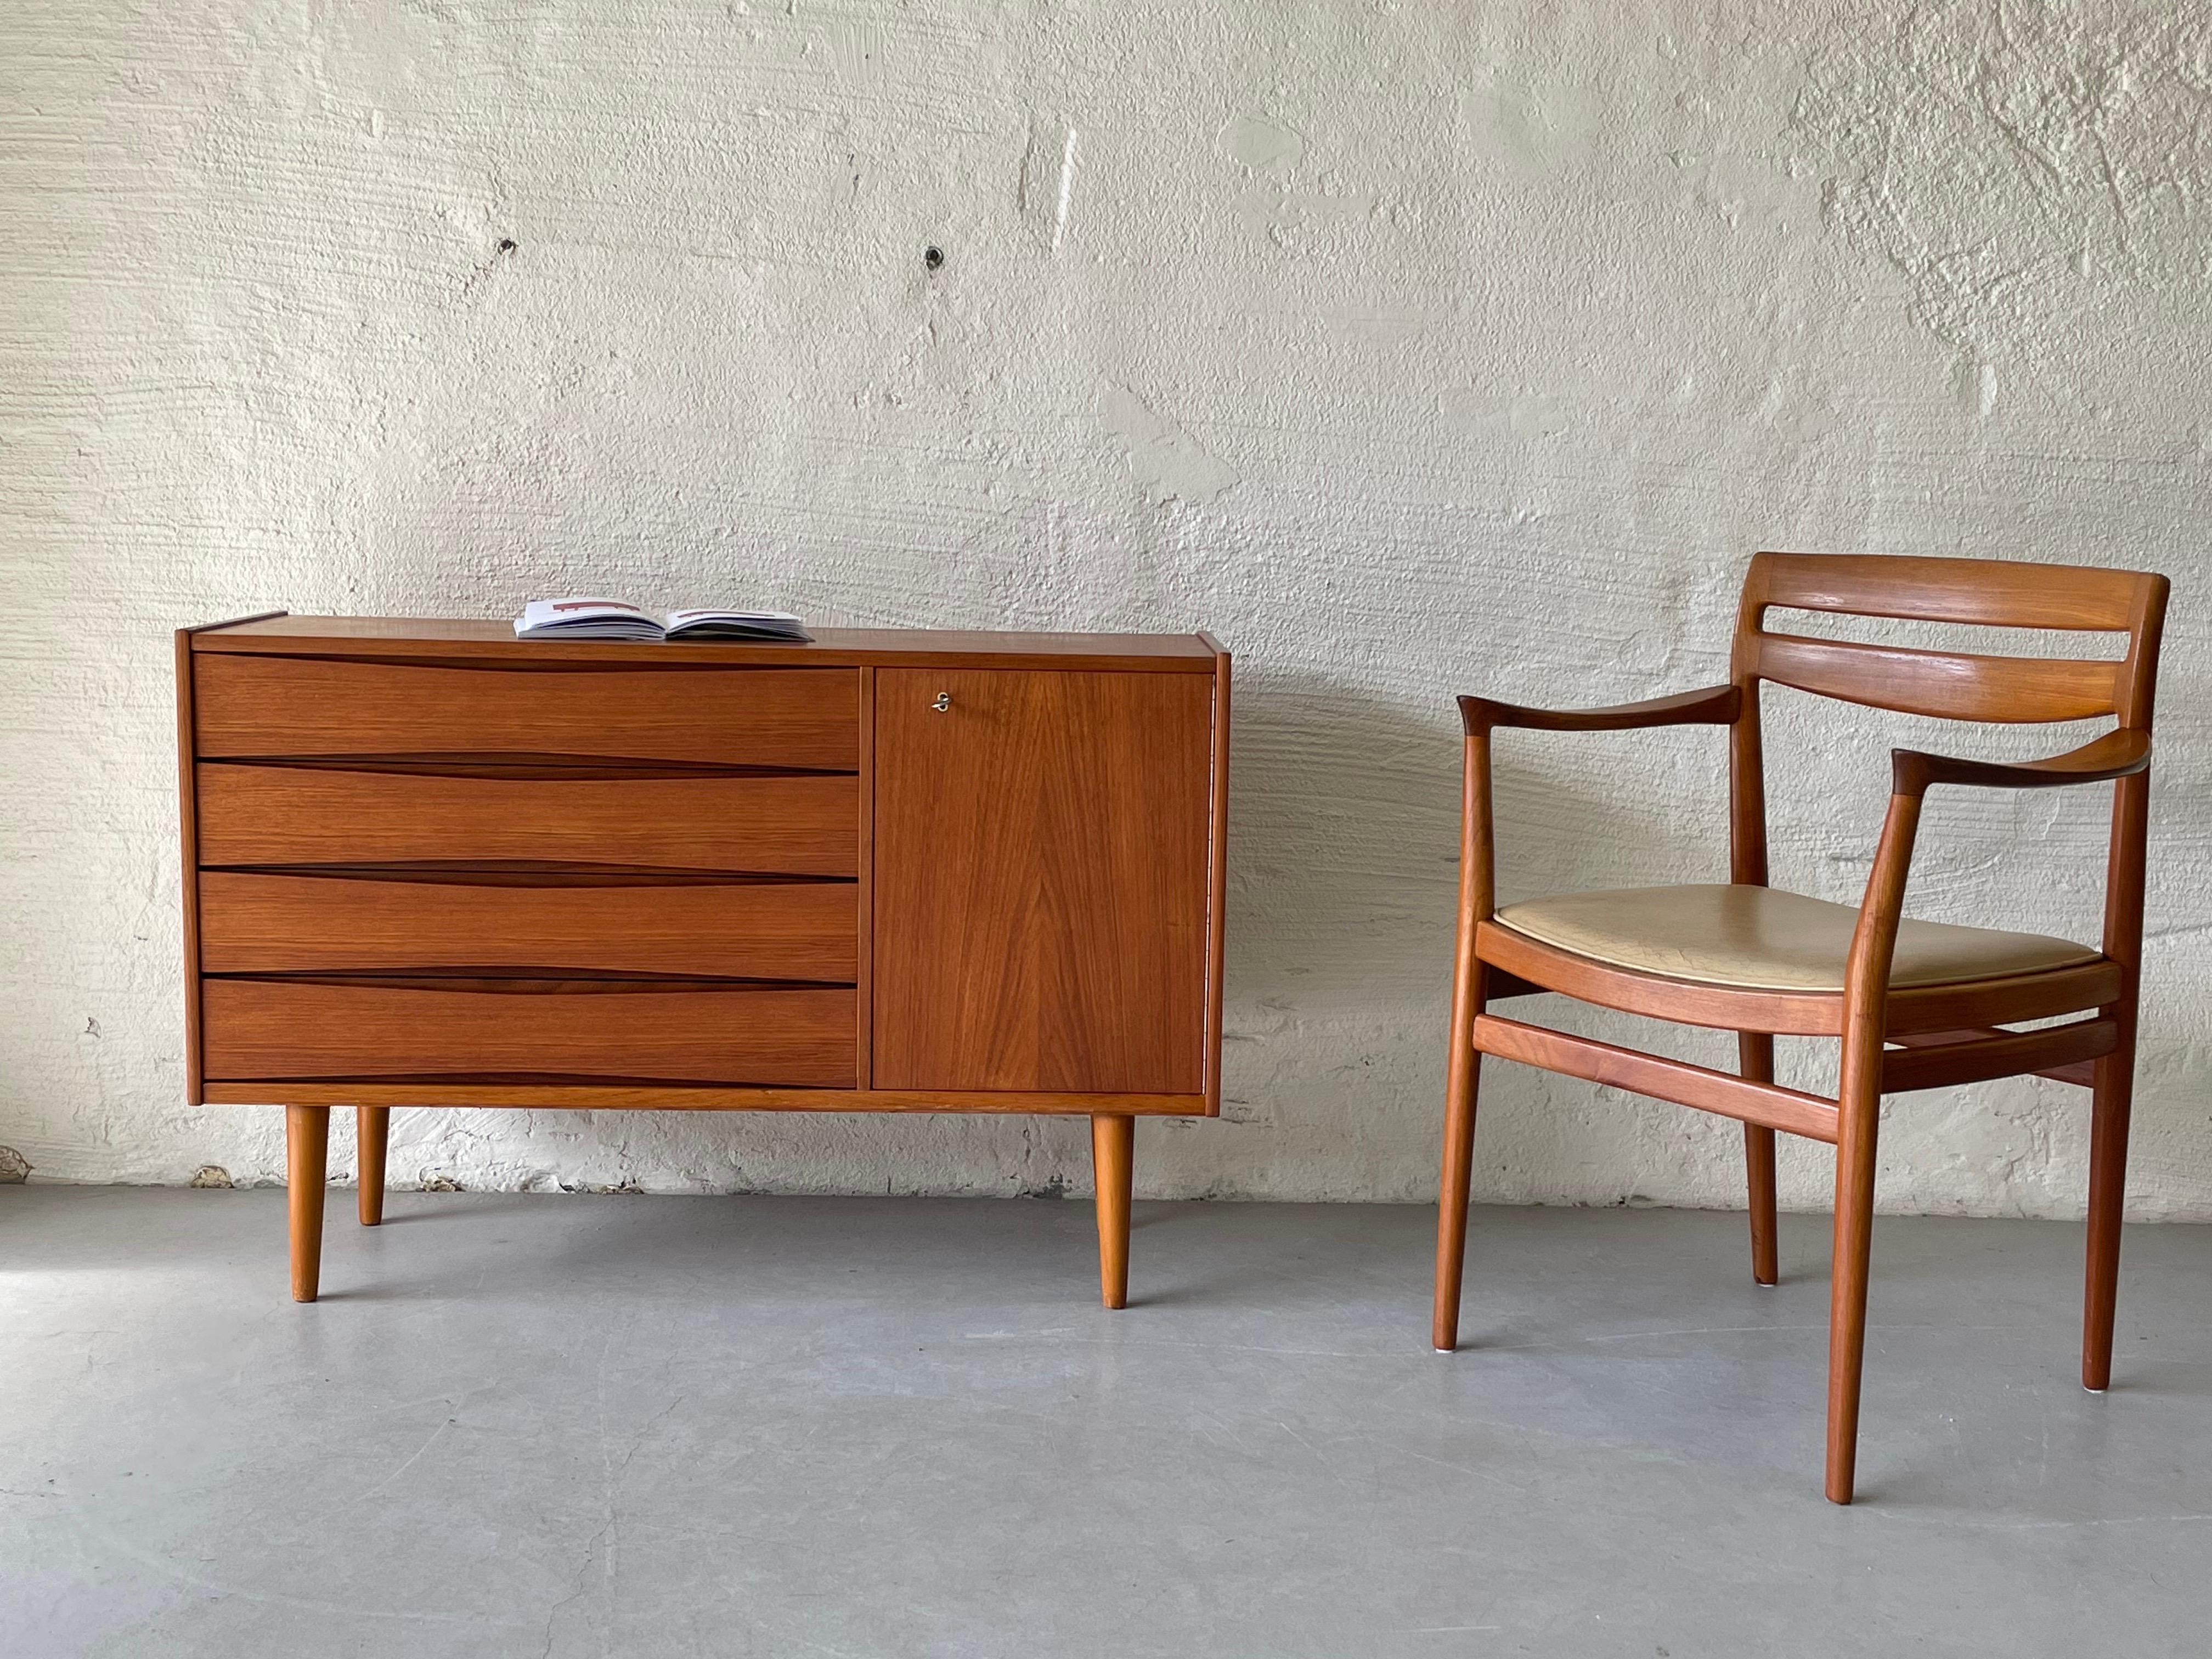 Mid-Century Modern sideboard in teak designed by Fredrik Kayser for Skeie & Co, Norway 1960s. The sideboard is equipped with four drawers crafted with sculpted handles. The locking cabinet features swing out doors revealing open storage space